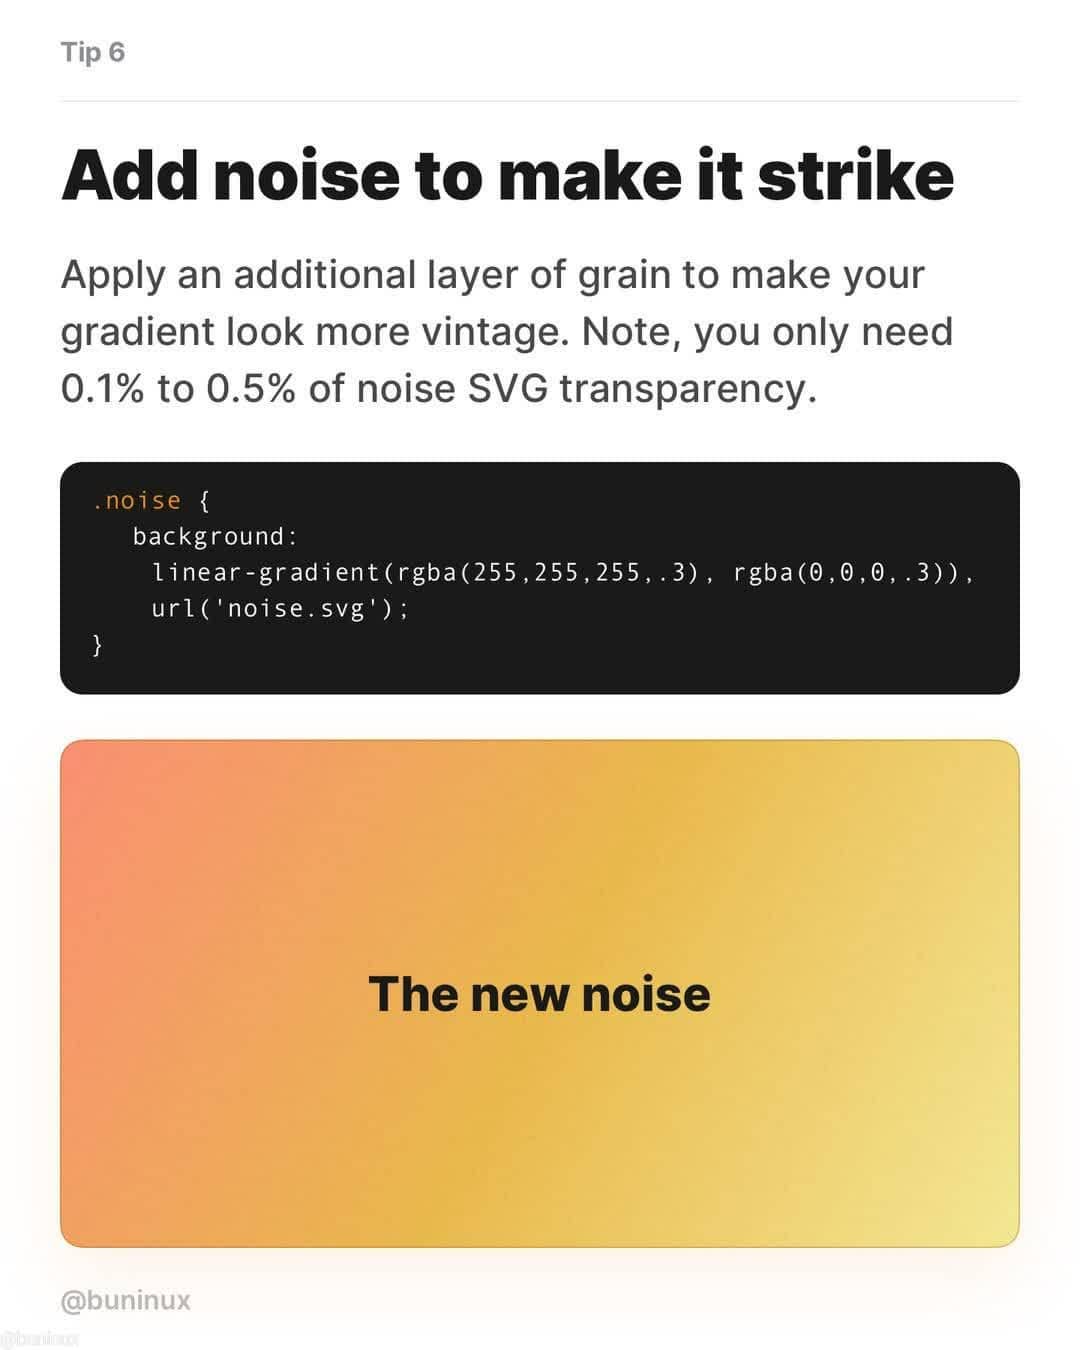 Tip 6 - Add noise to make it strike